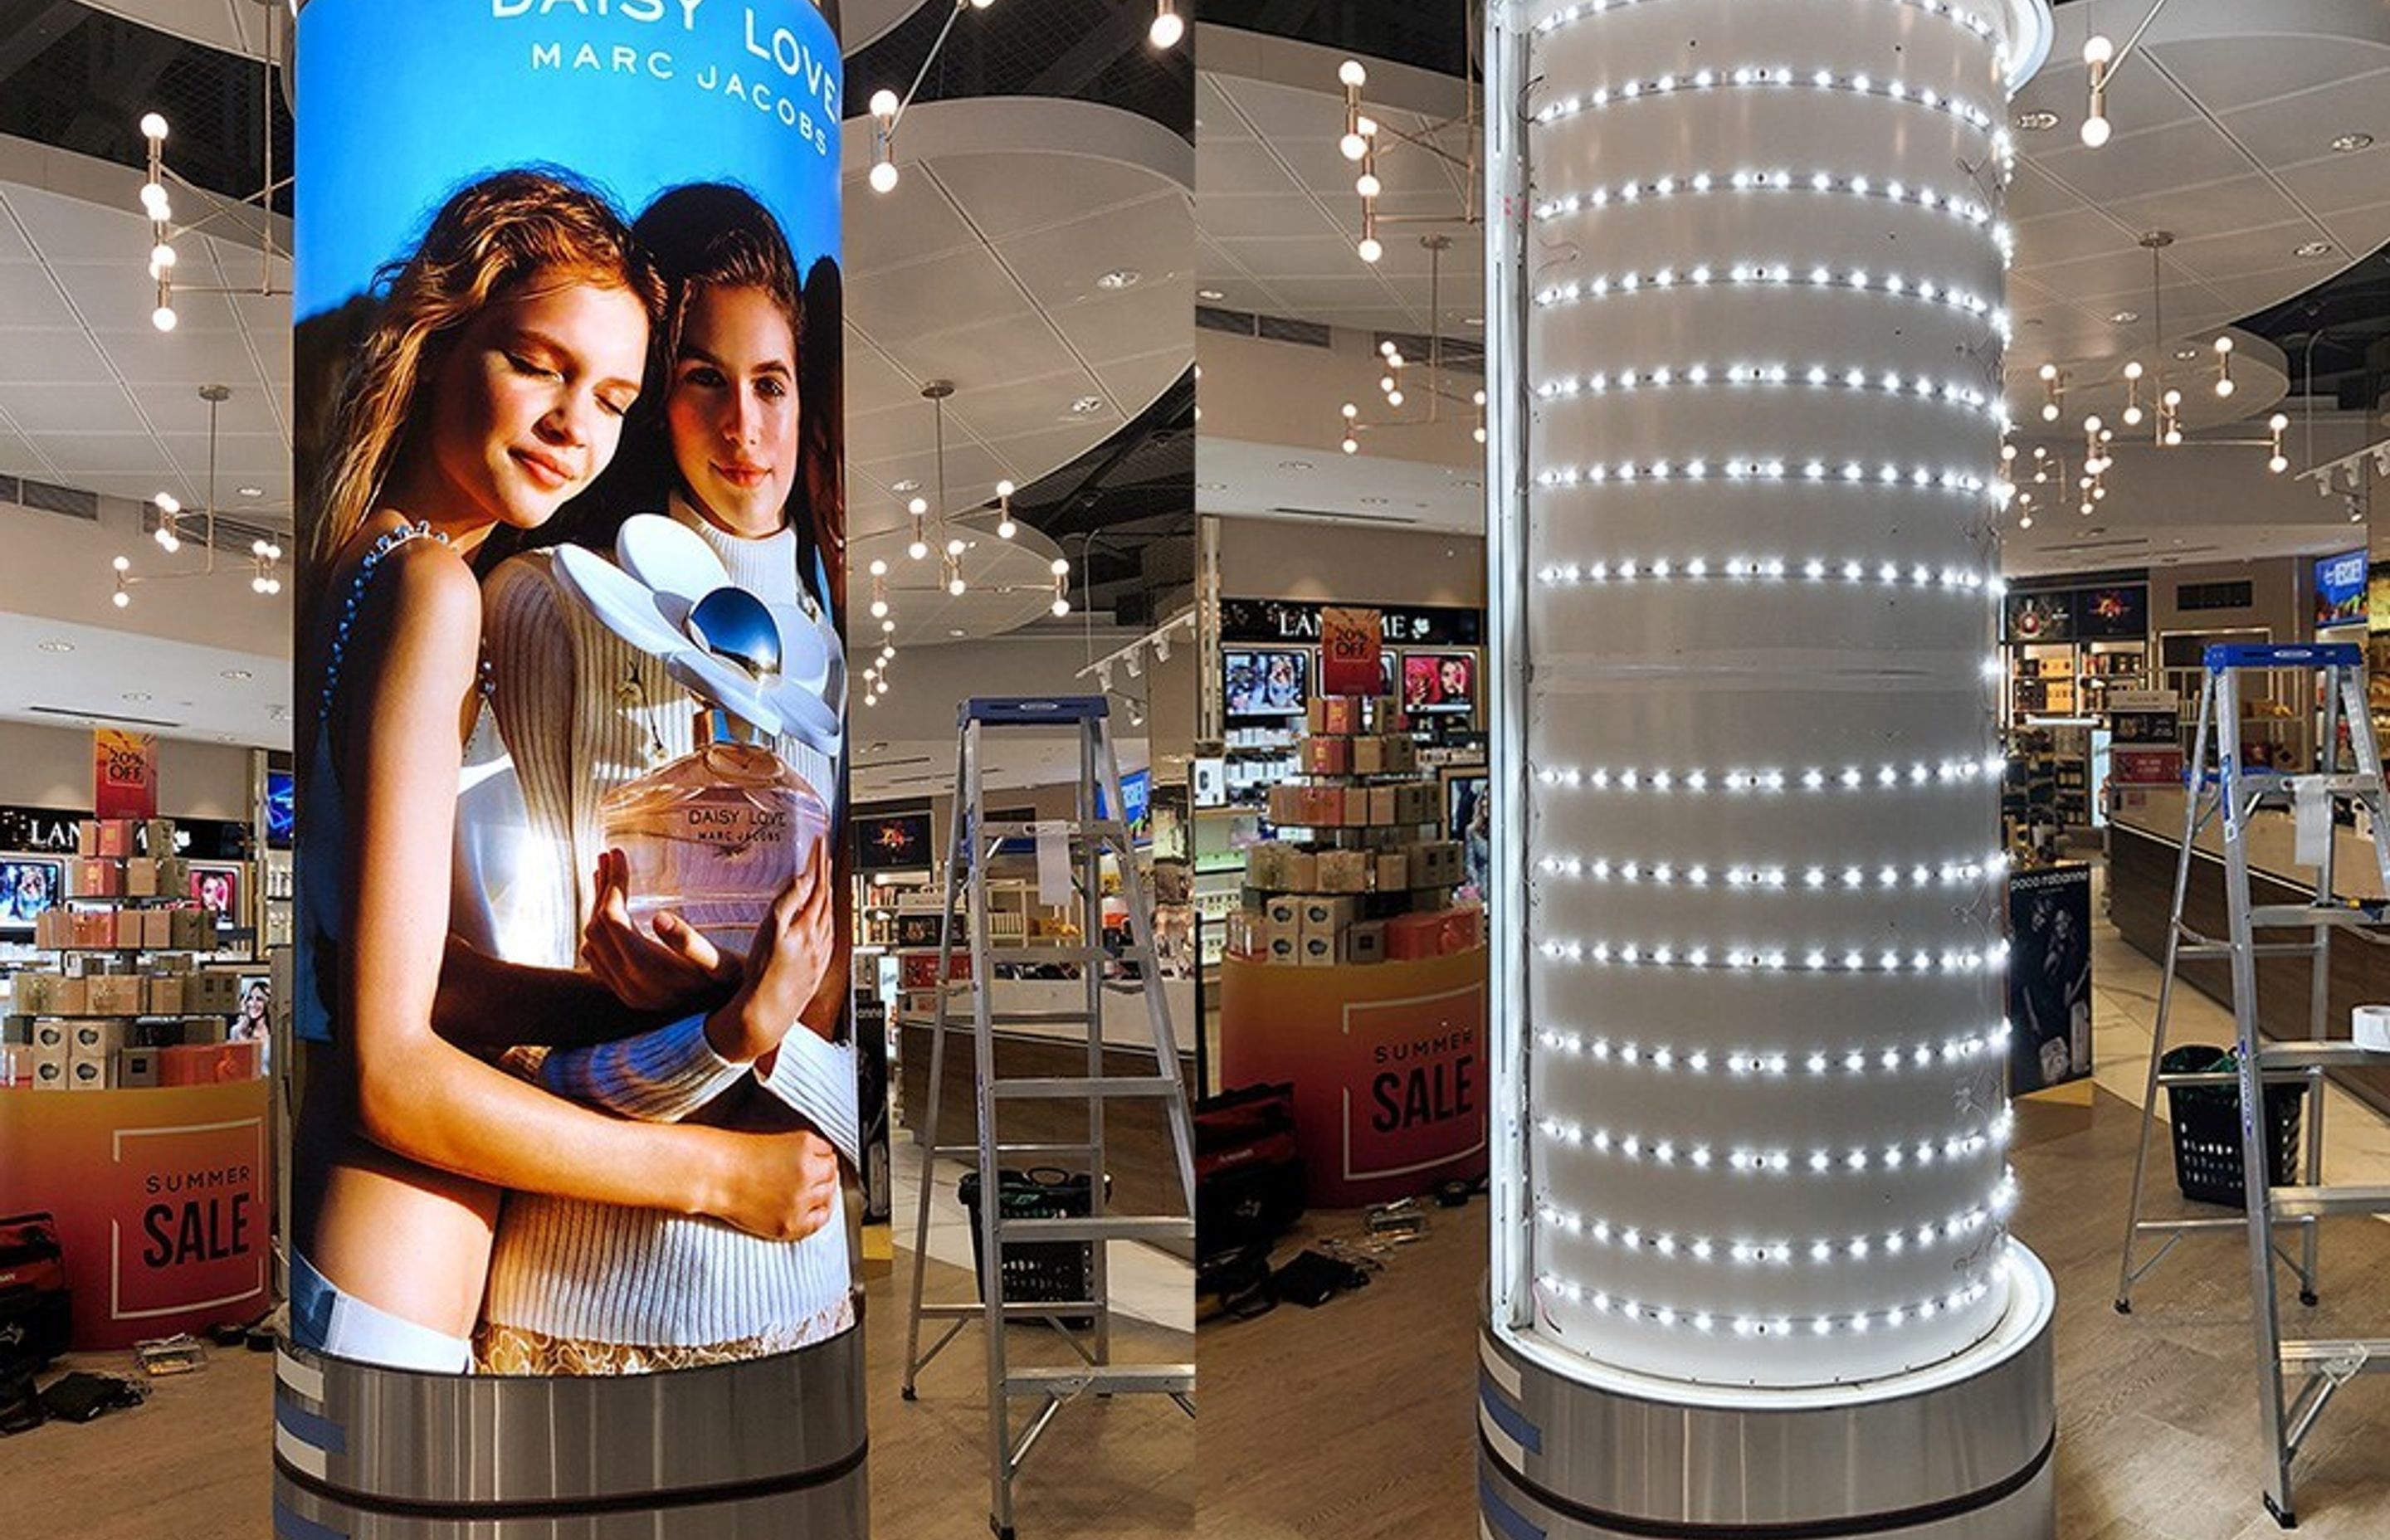 The Lucent system is ideal for marketing and advertising.